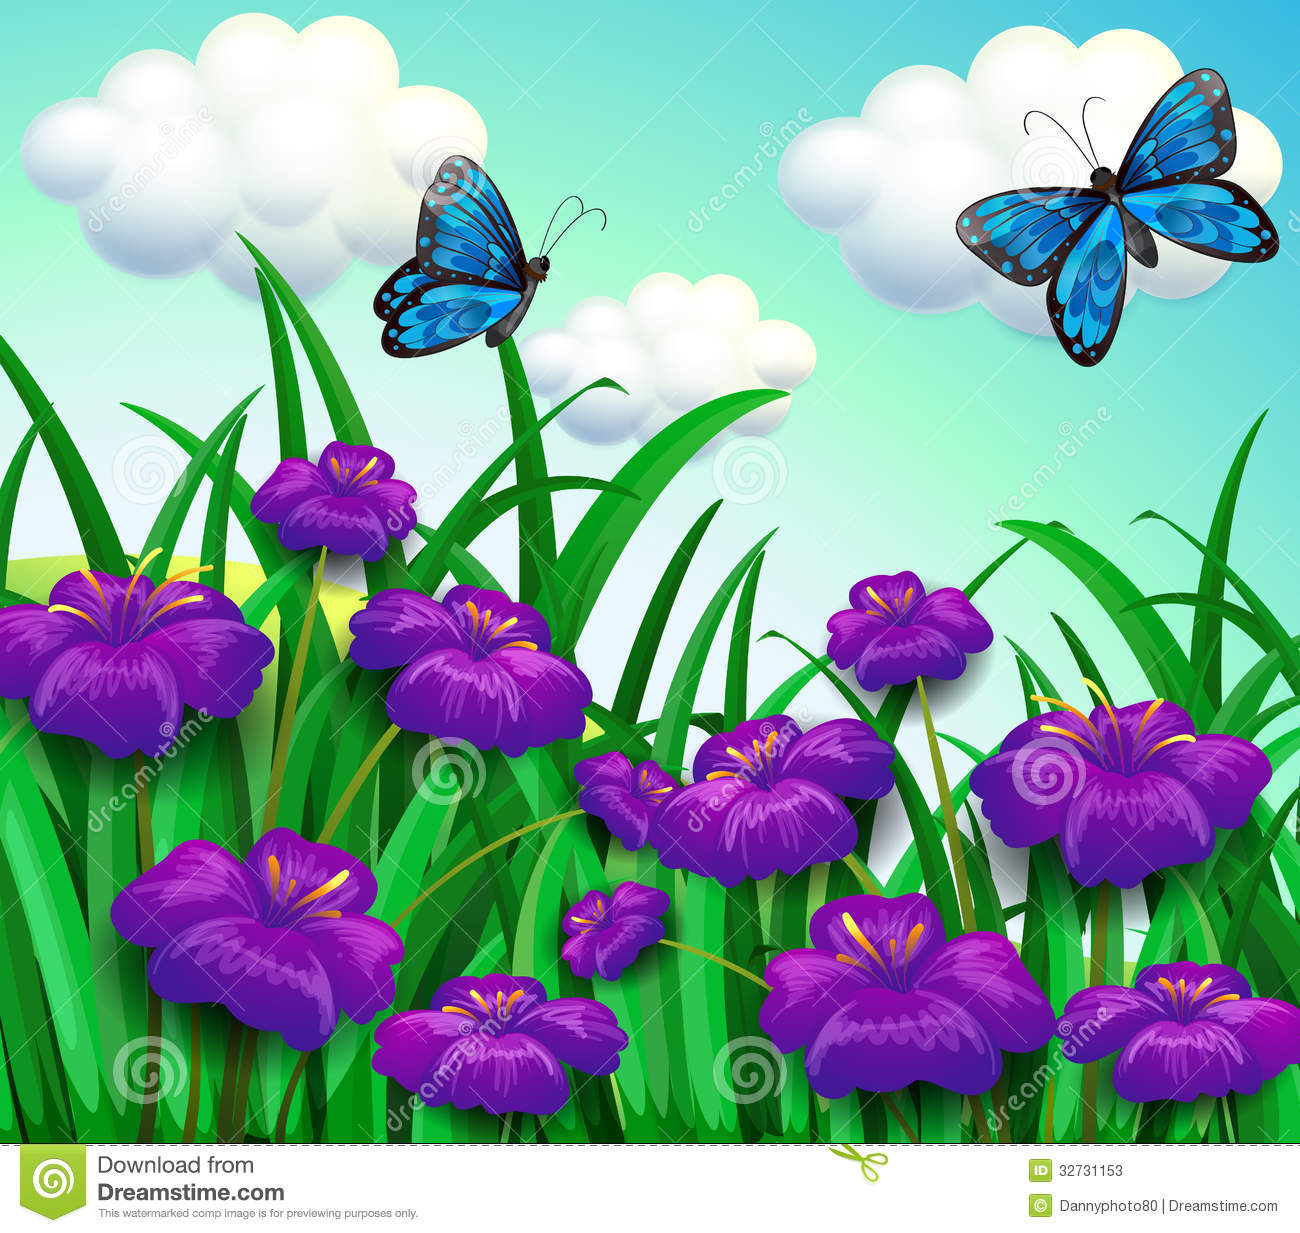 At The Garden With Violet Flowers Stock Photos   Image  32731153